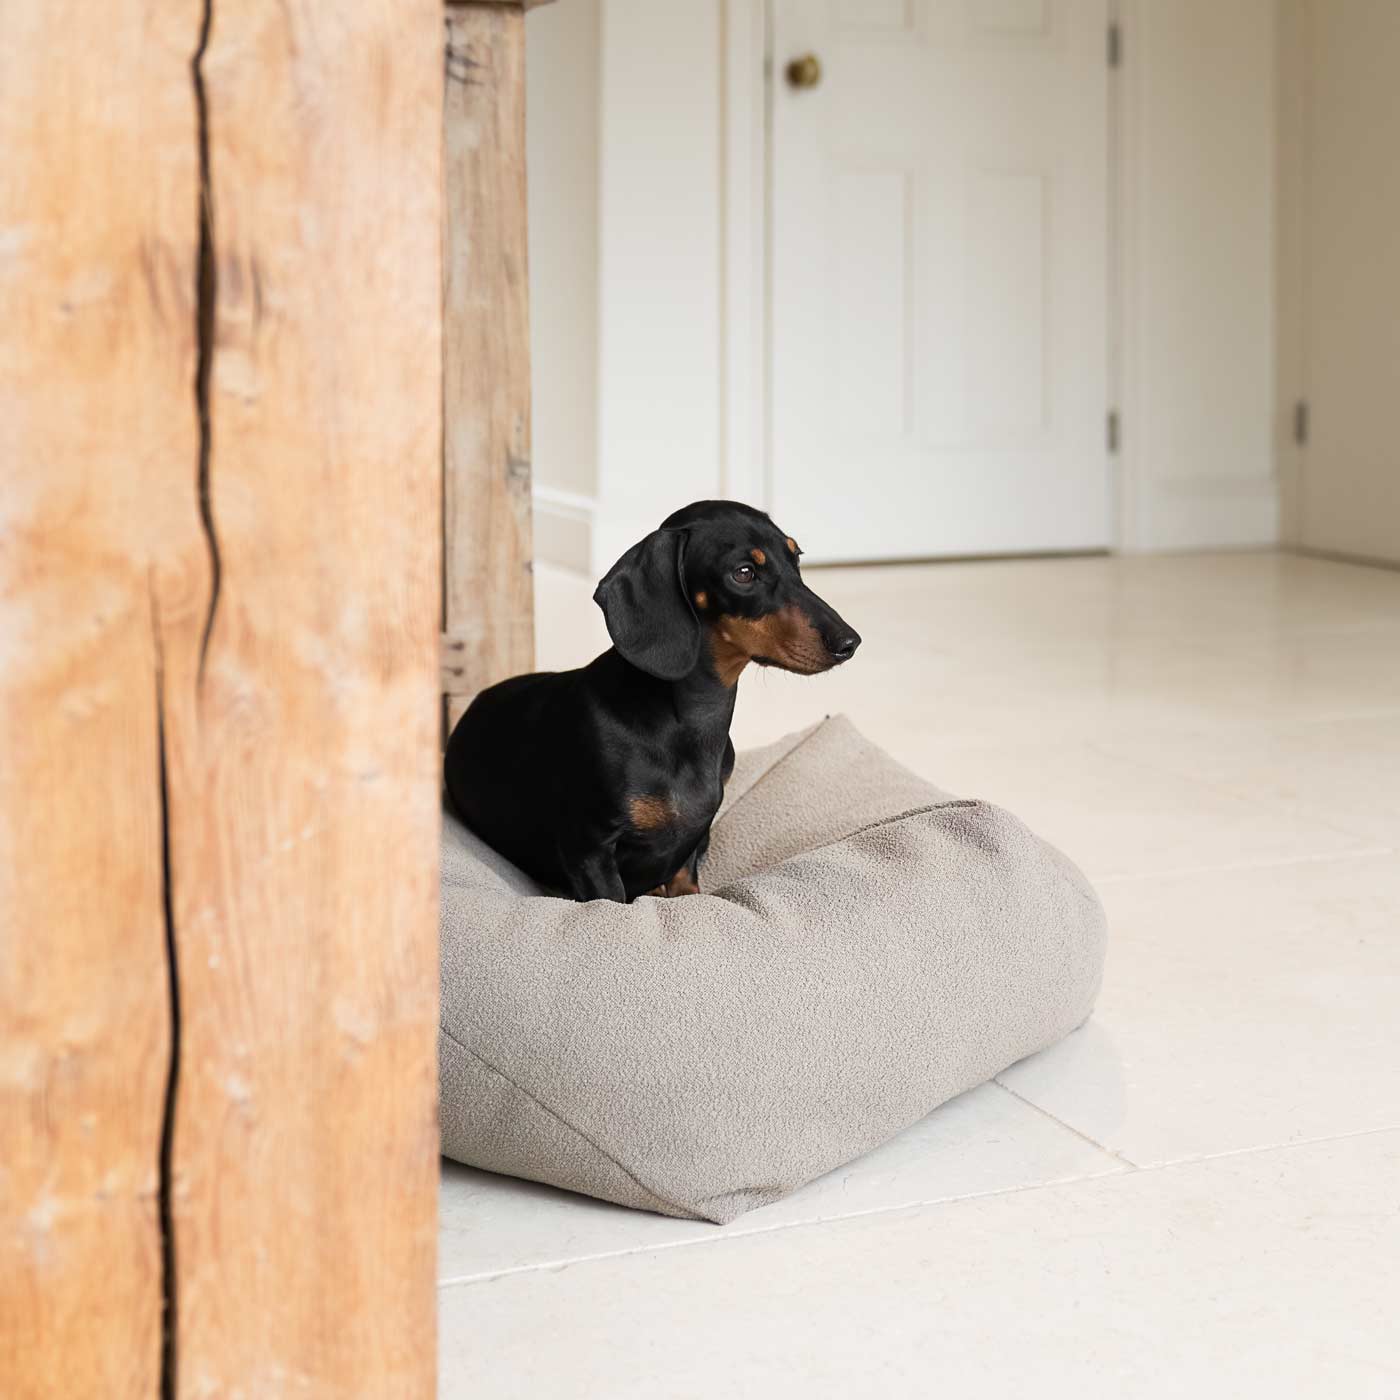 Lords & Labradors Snooze Pouff Puffy Pet Bed, Luxury Beds For Dogs, Available Now at Lords & Labradors